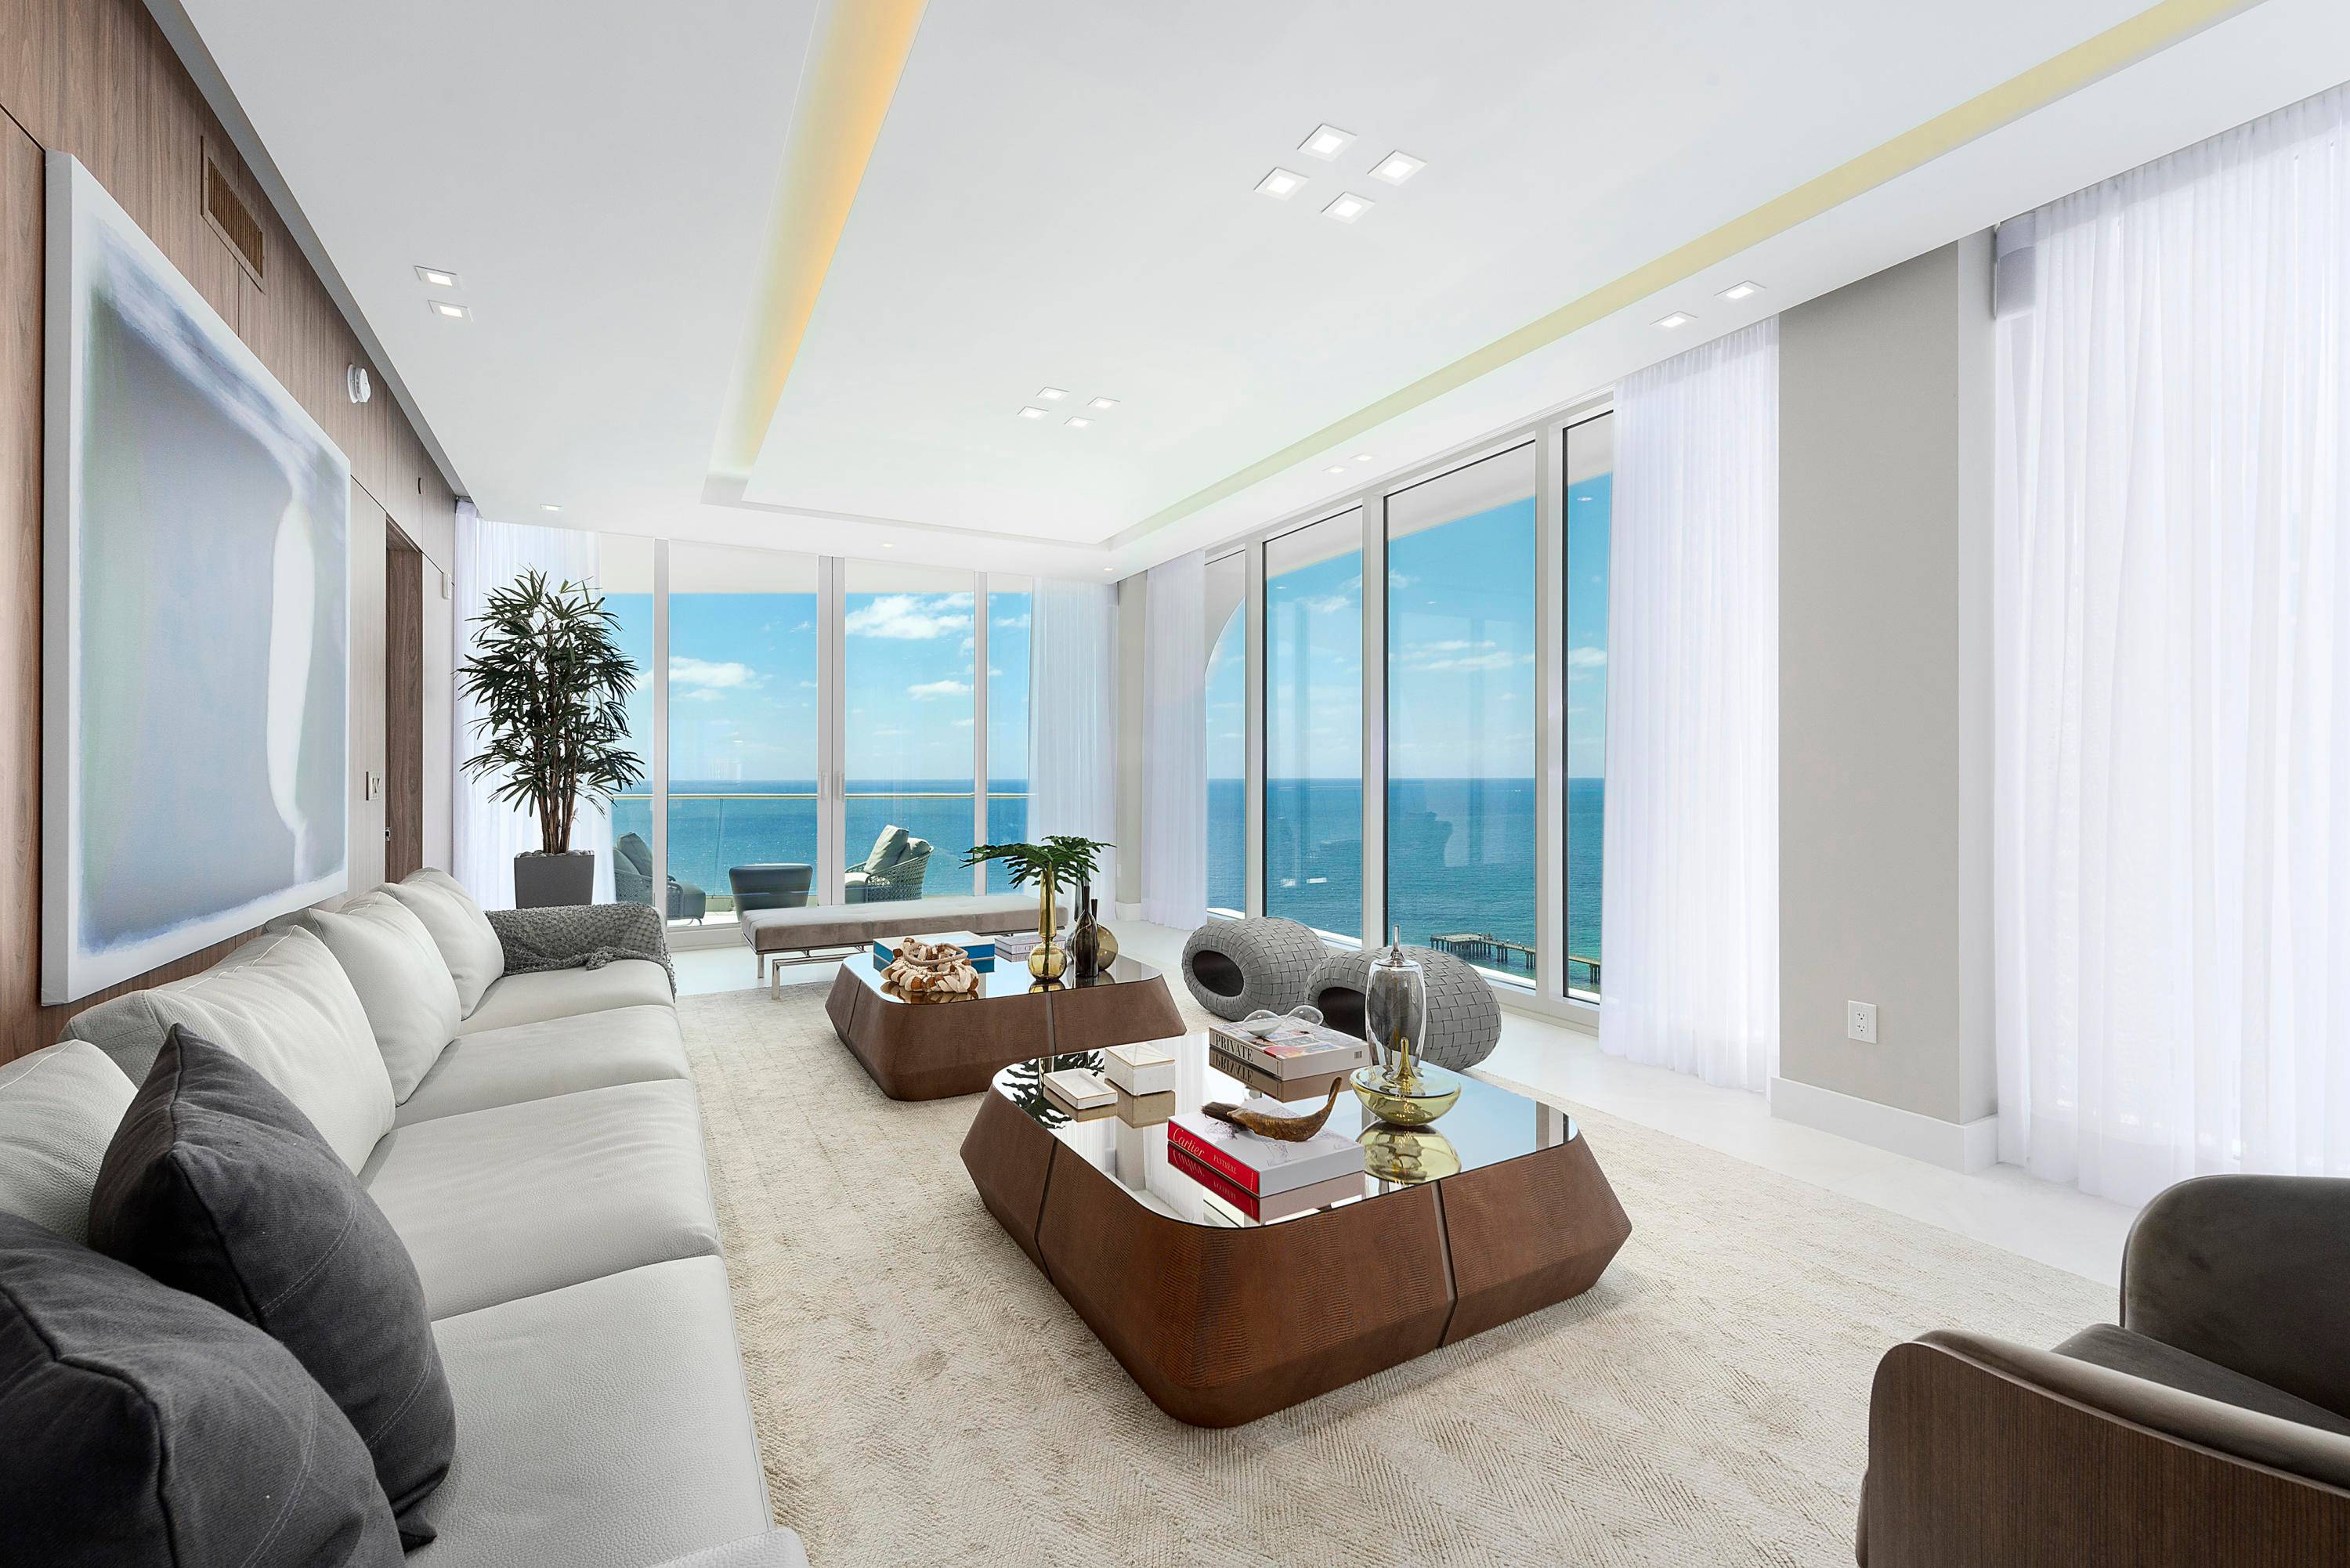 More than just changing the skyline of Sunny Isles Beach with its 50 plus stories, Jade Signature has reimagined the residential landscape in South Florida with a towering oceanfront achievement.